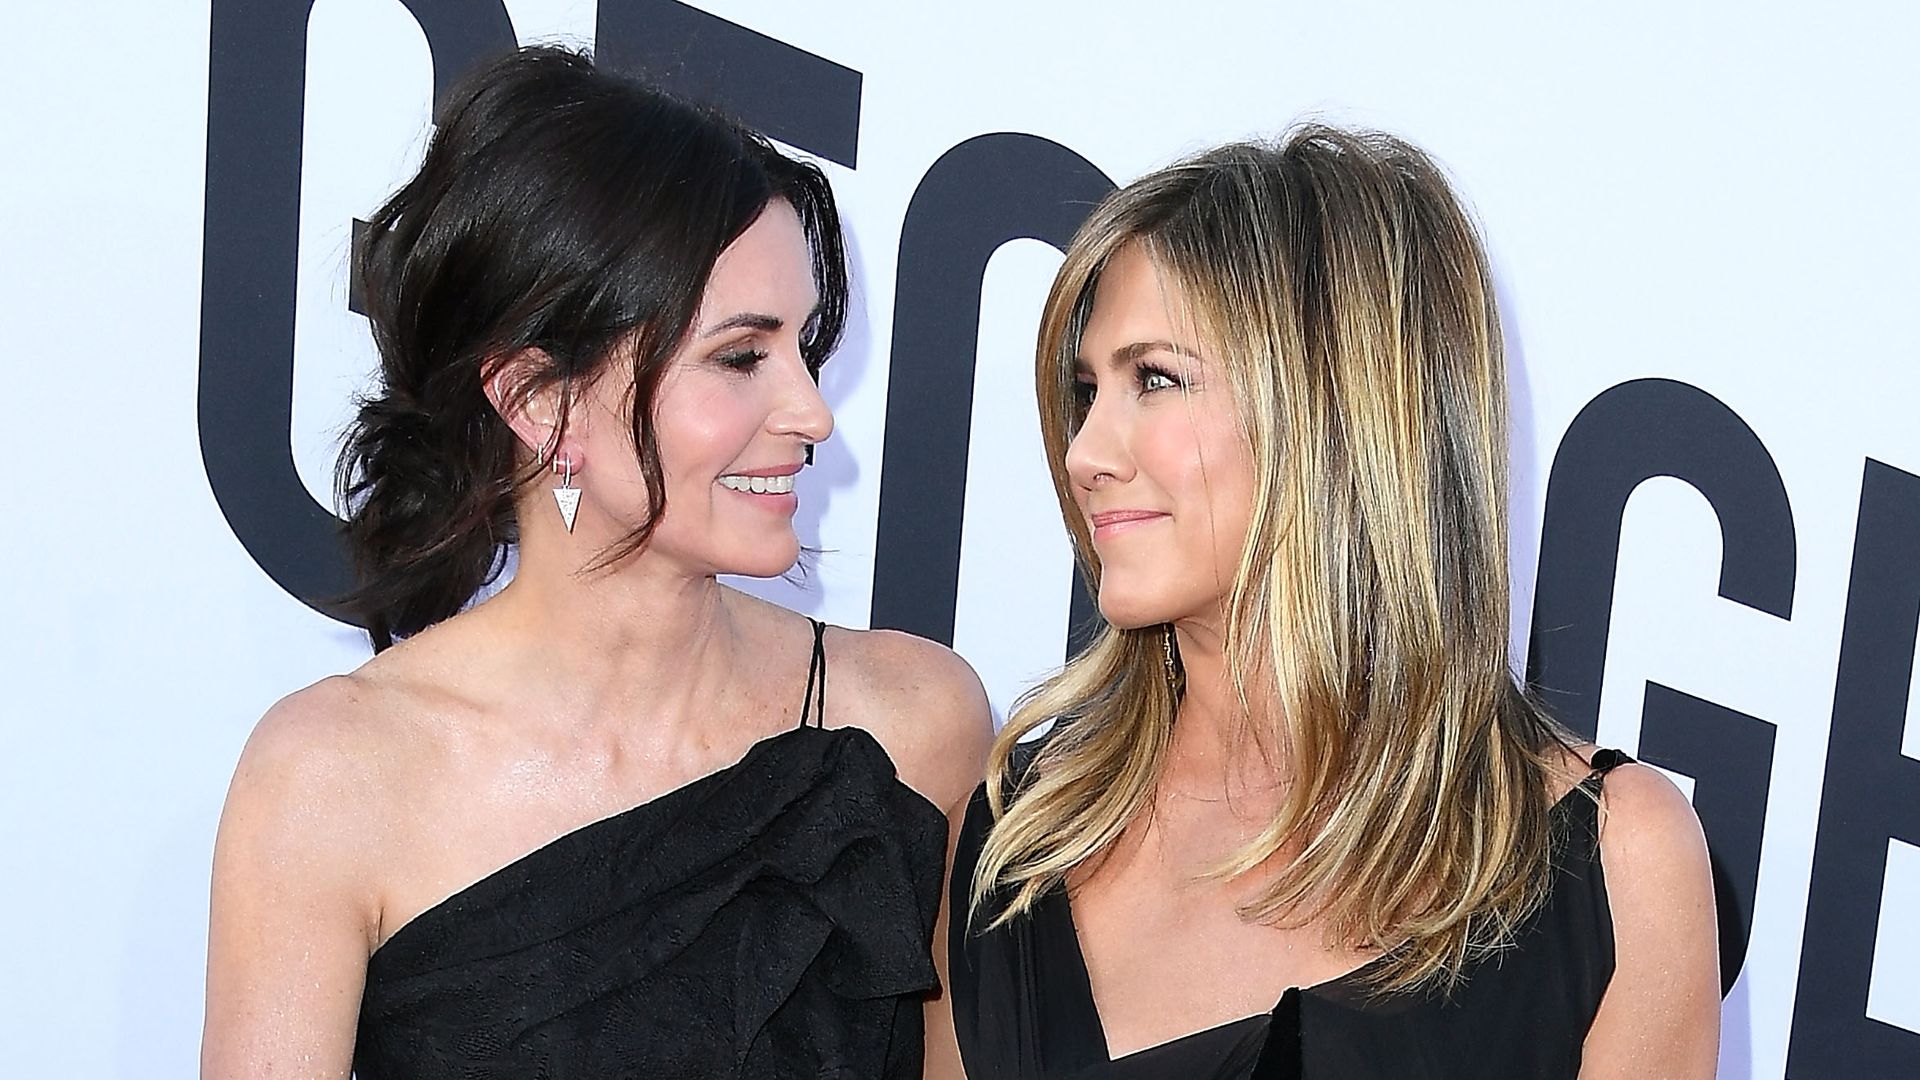 Courteney Cox, Jennifer Aniston arrives at the American Film Institute's 46th Life Achievement Award Gala Tribute To George Clooney on June 7, 2018 in Hollywood, California